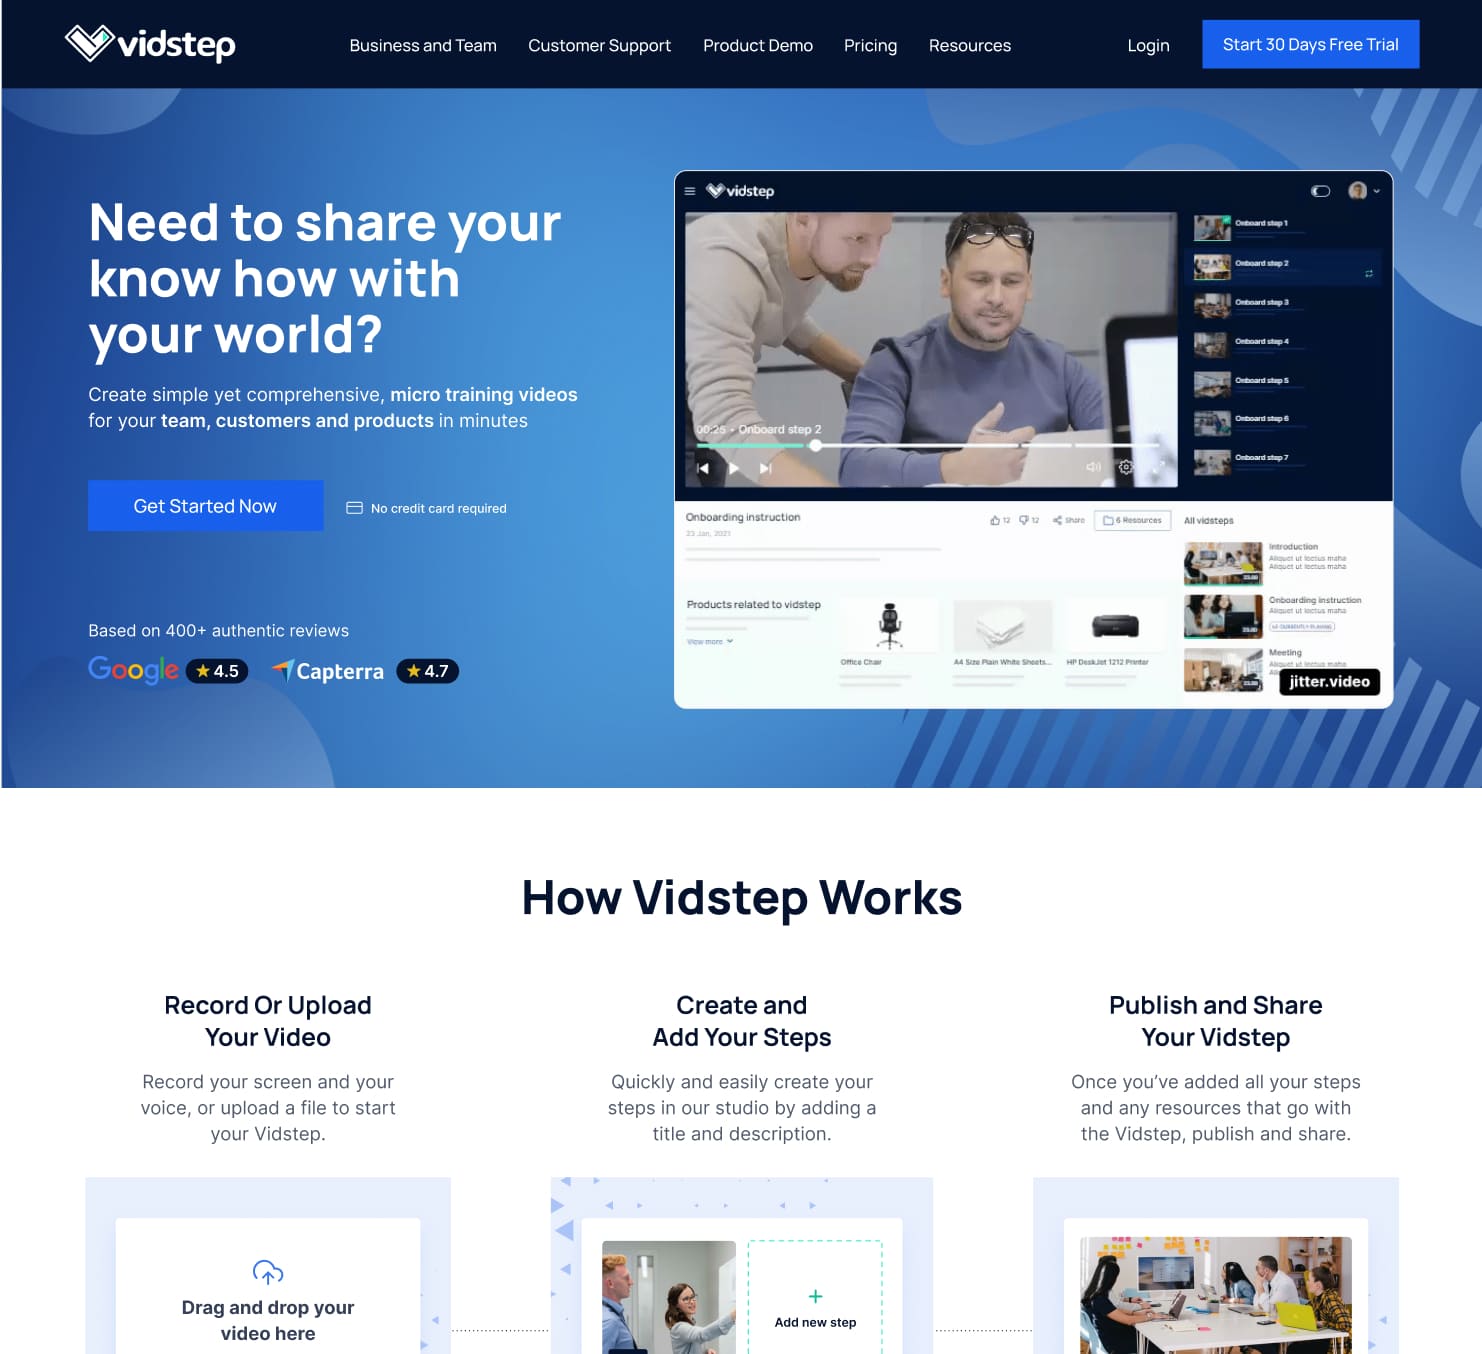 Image of the home page of the vidstep website